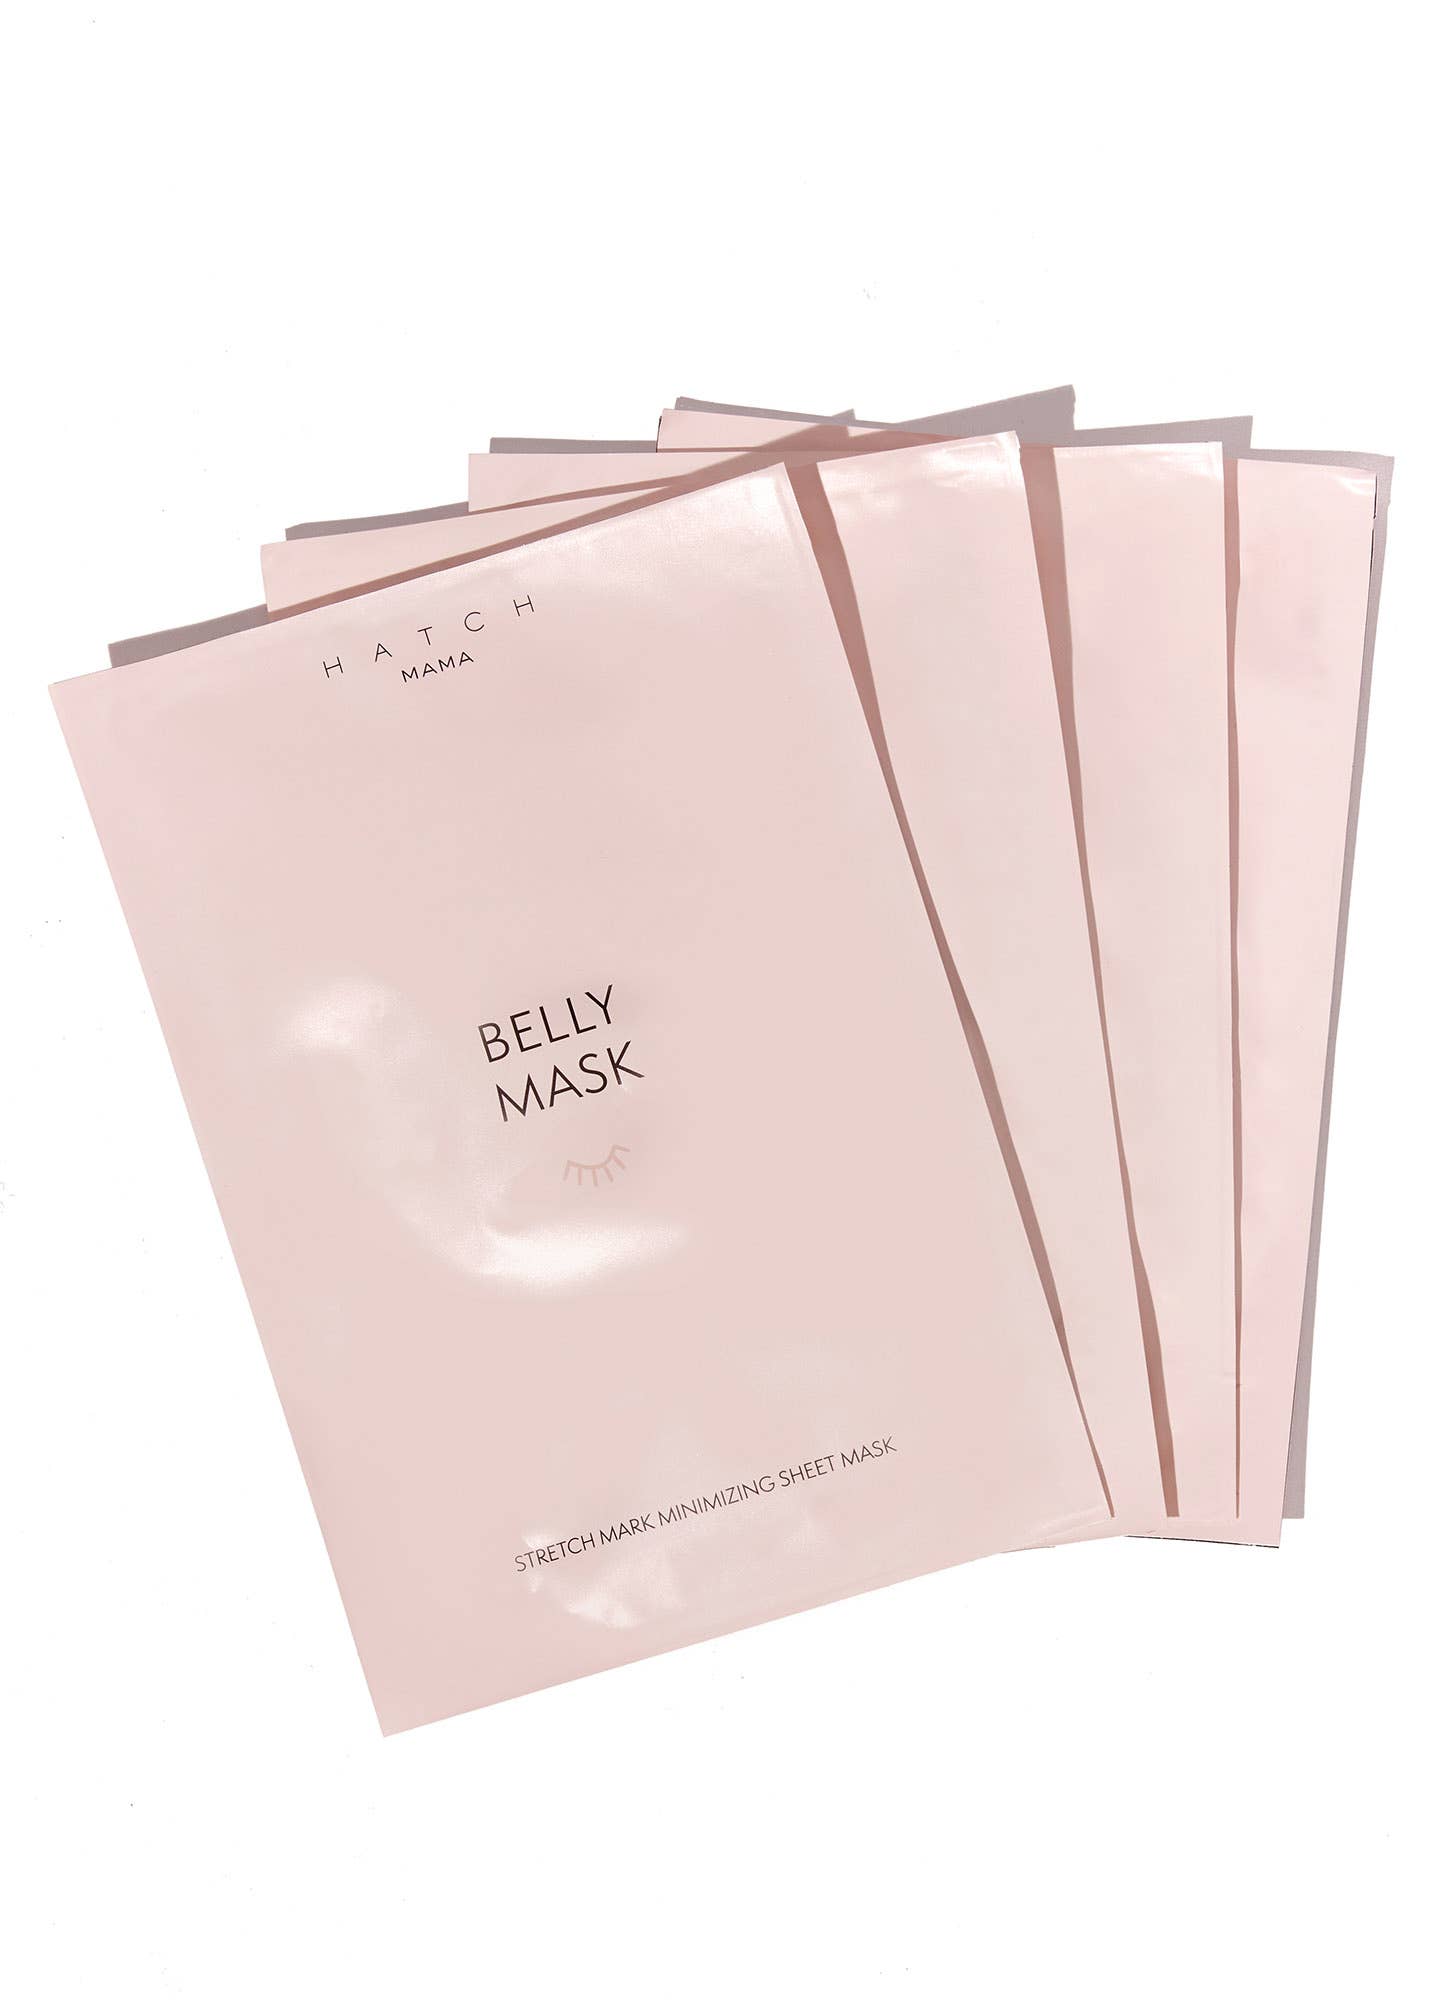 HATCH Collection - Belly Fix - Original Belly Mask (4PK)